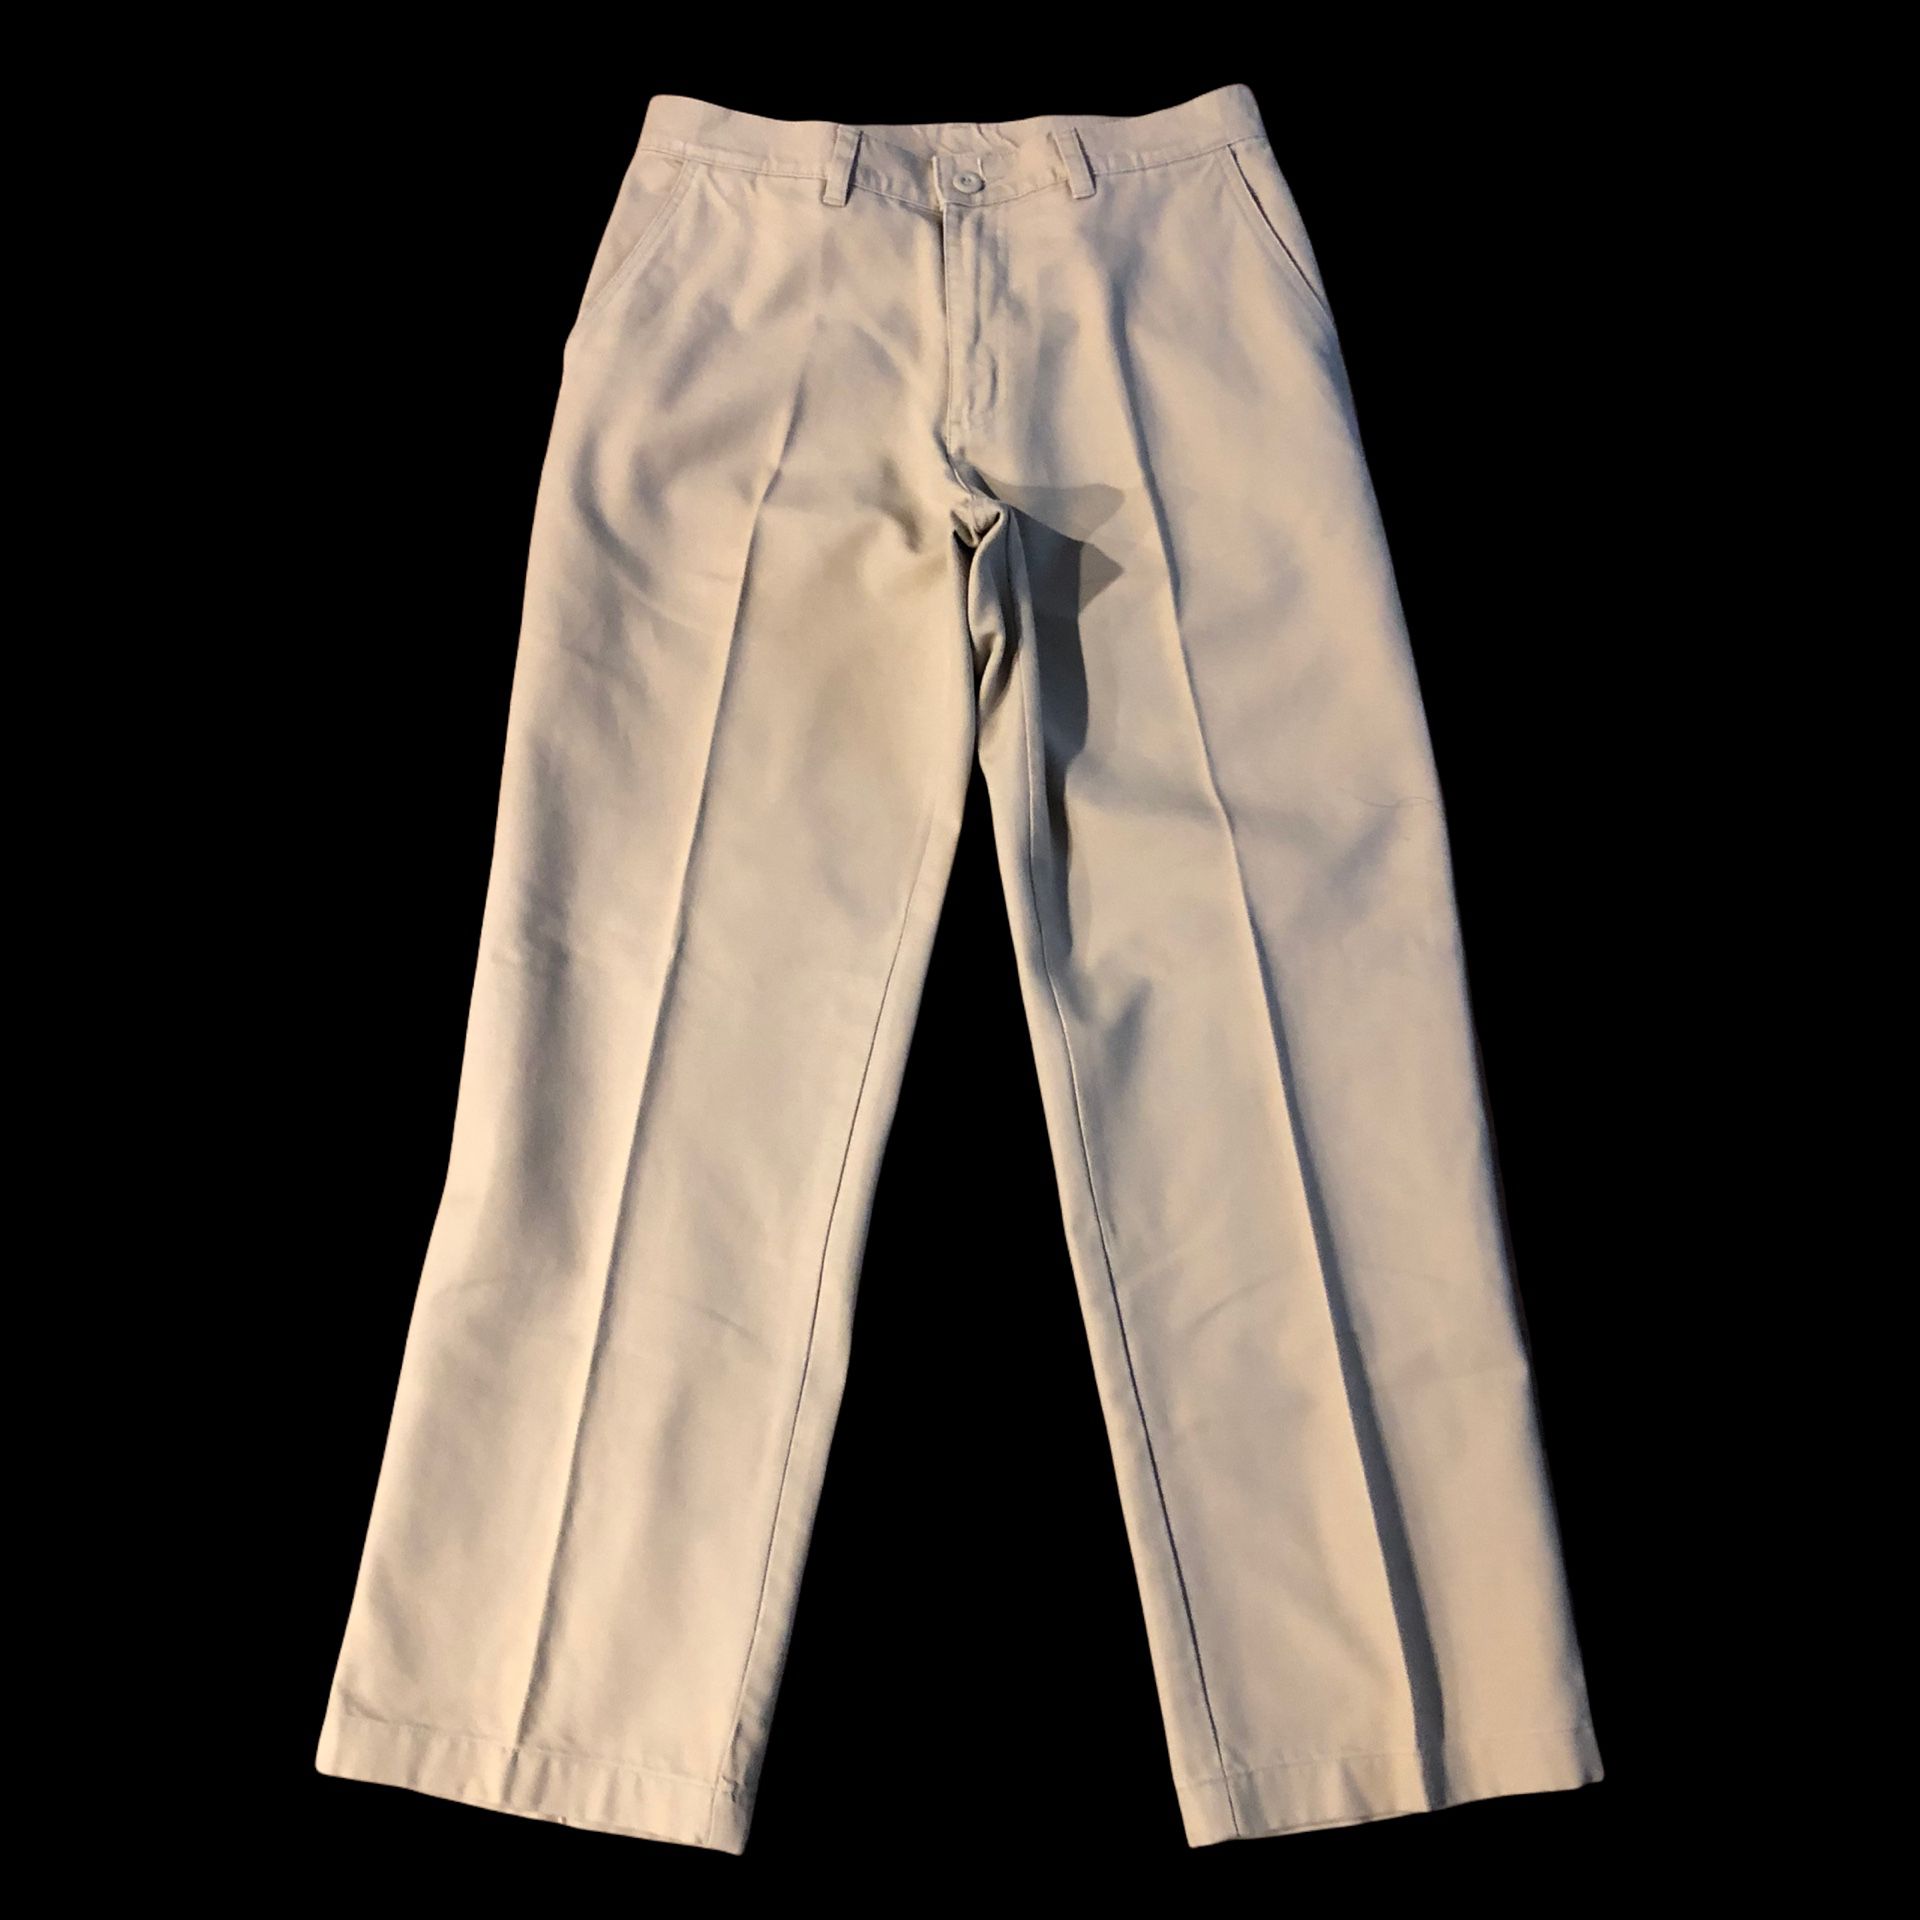 patagonia mens pants 31 beige chino front flat cotton.  . excellent used condition like new